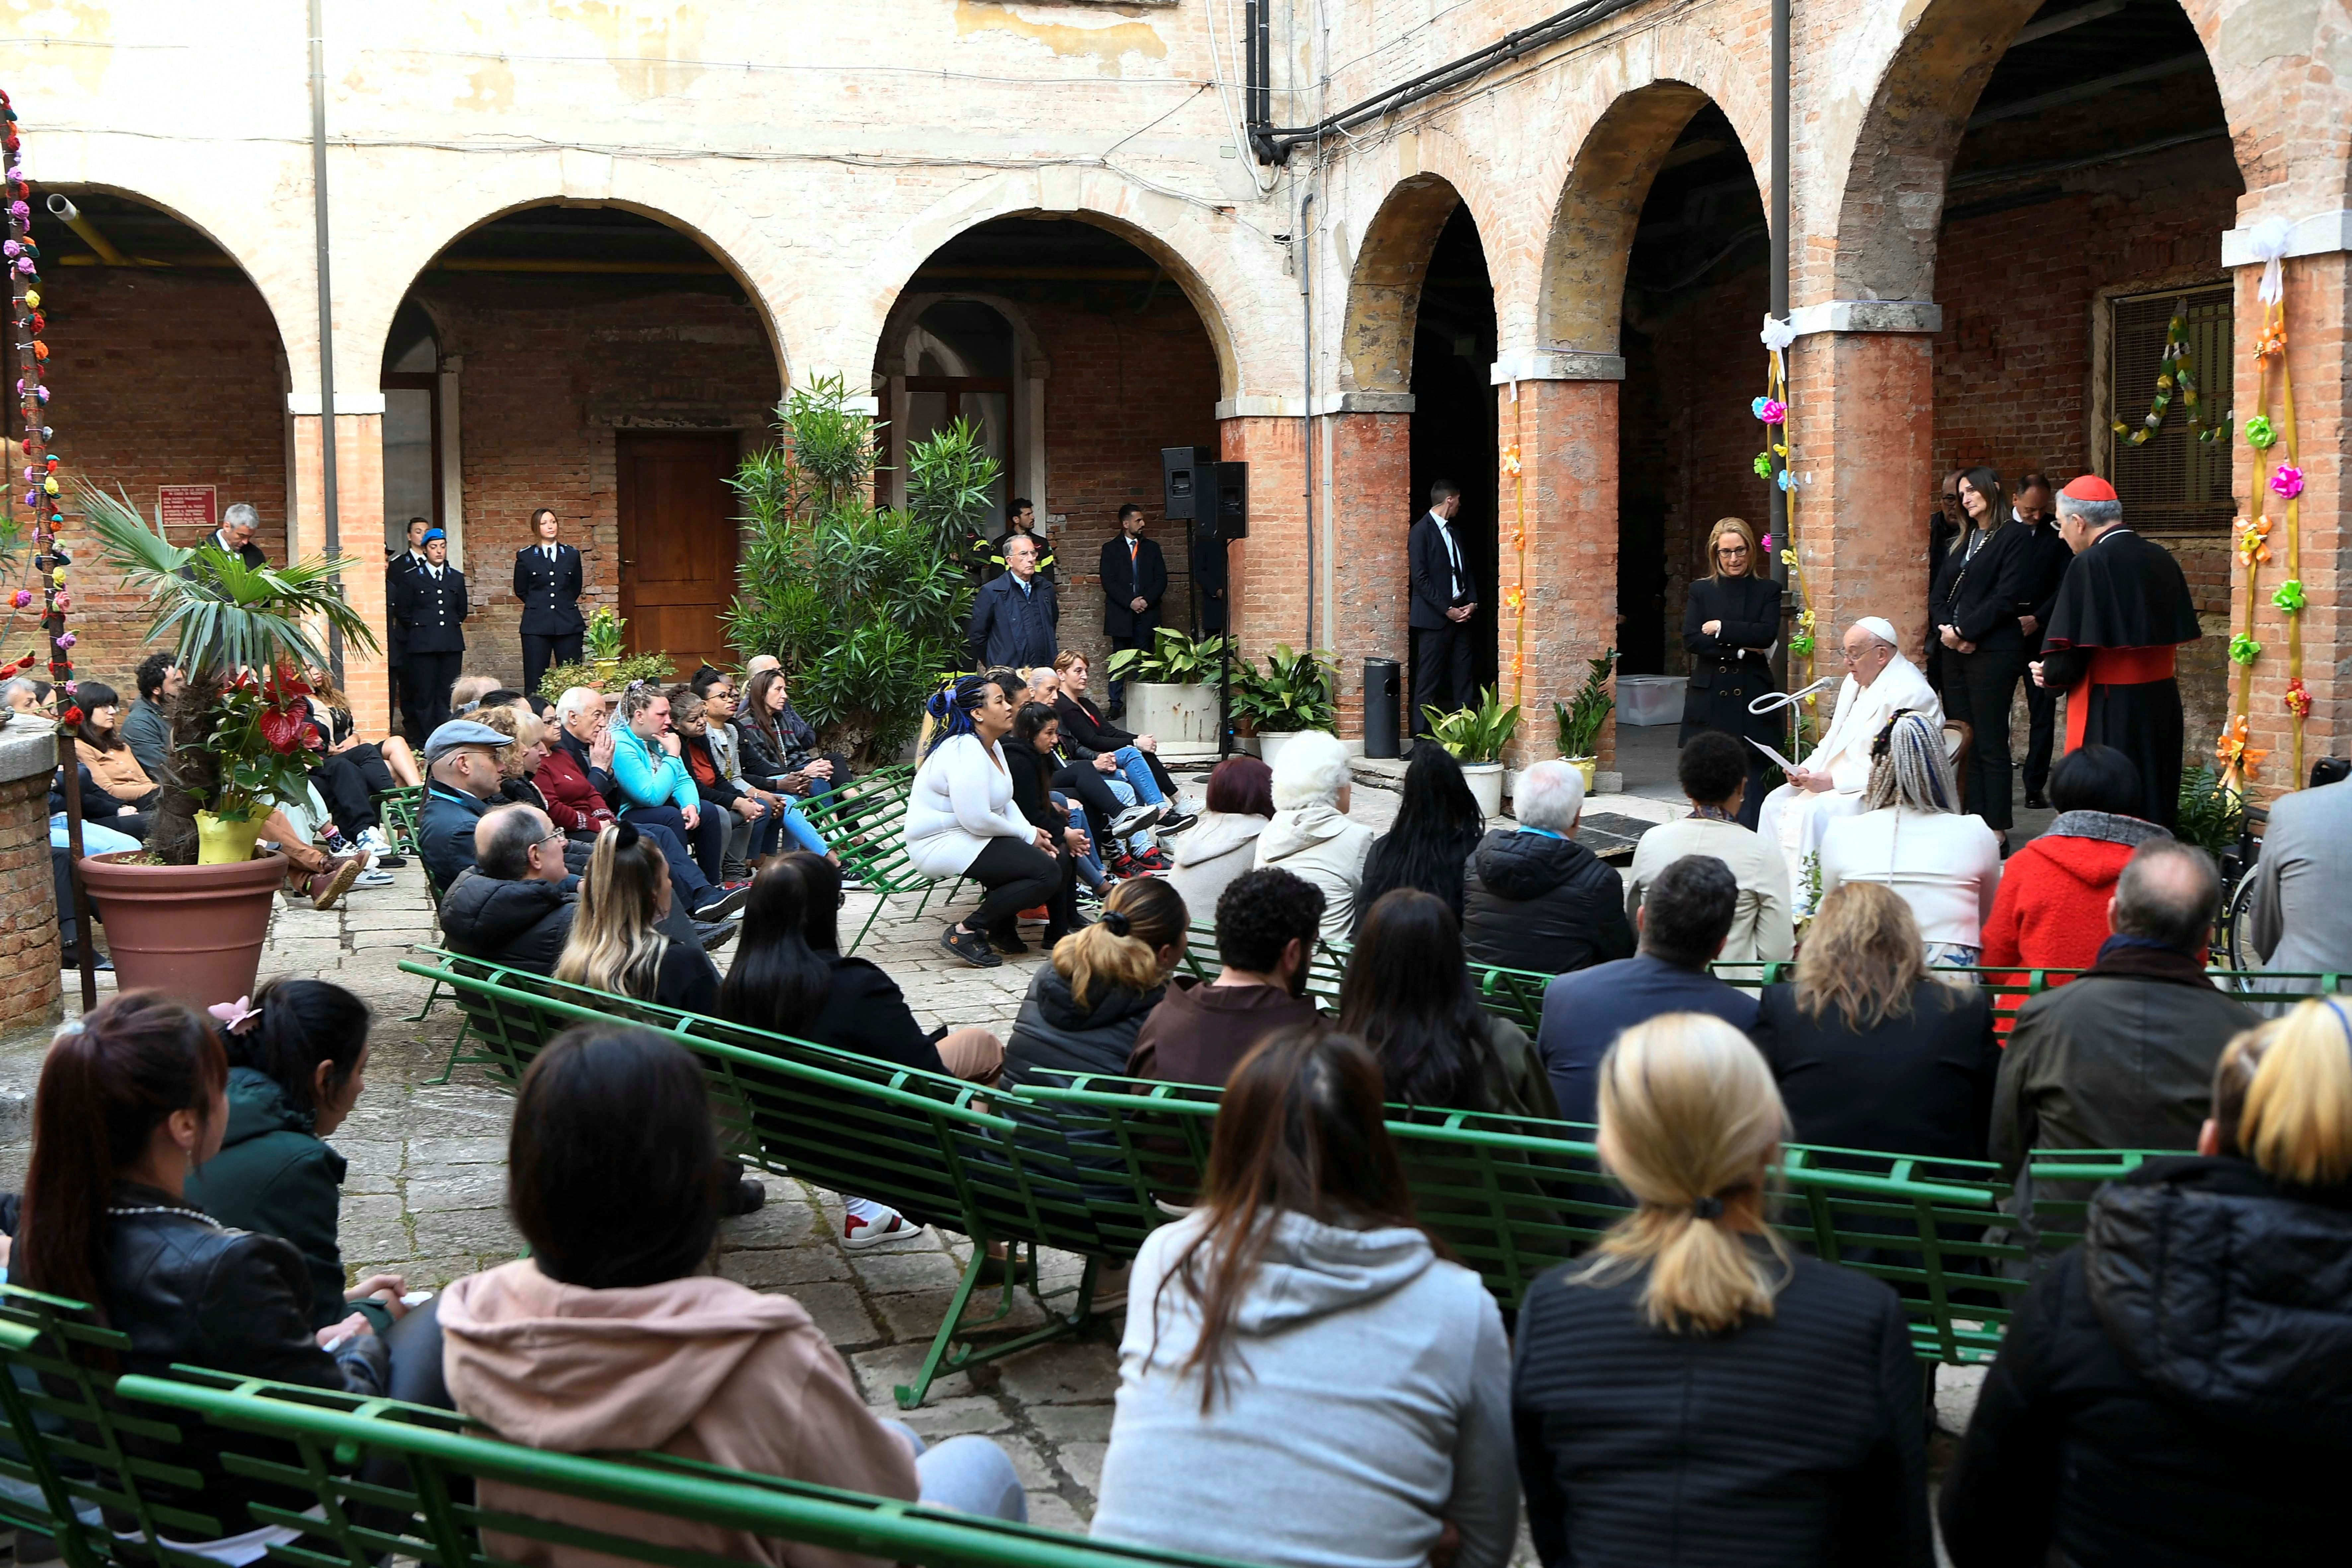 Pope Francis meets with faithful at the Venice Women's Prison on the Island of Giudecca